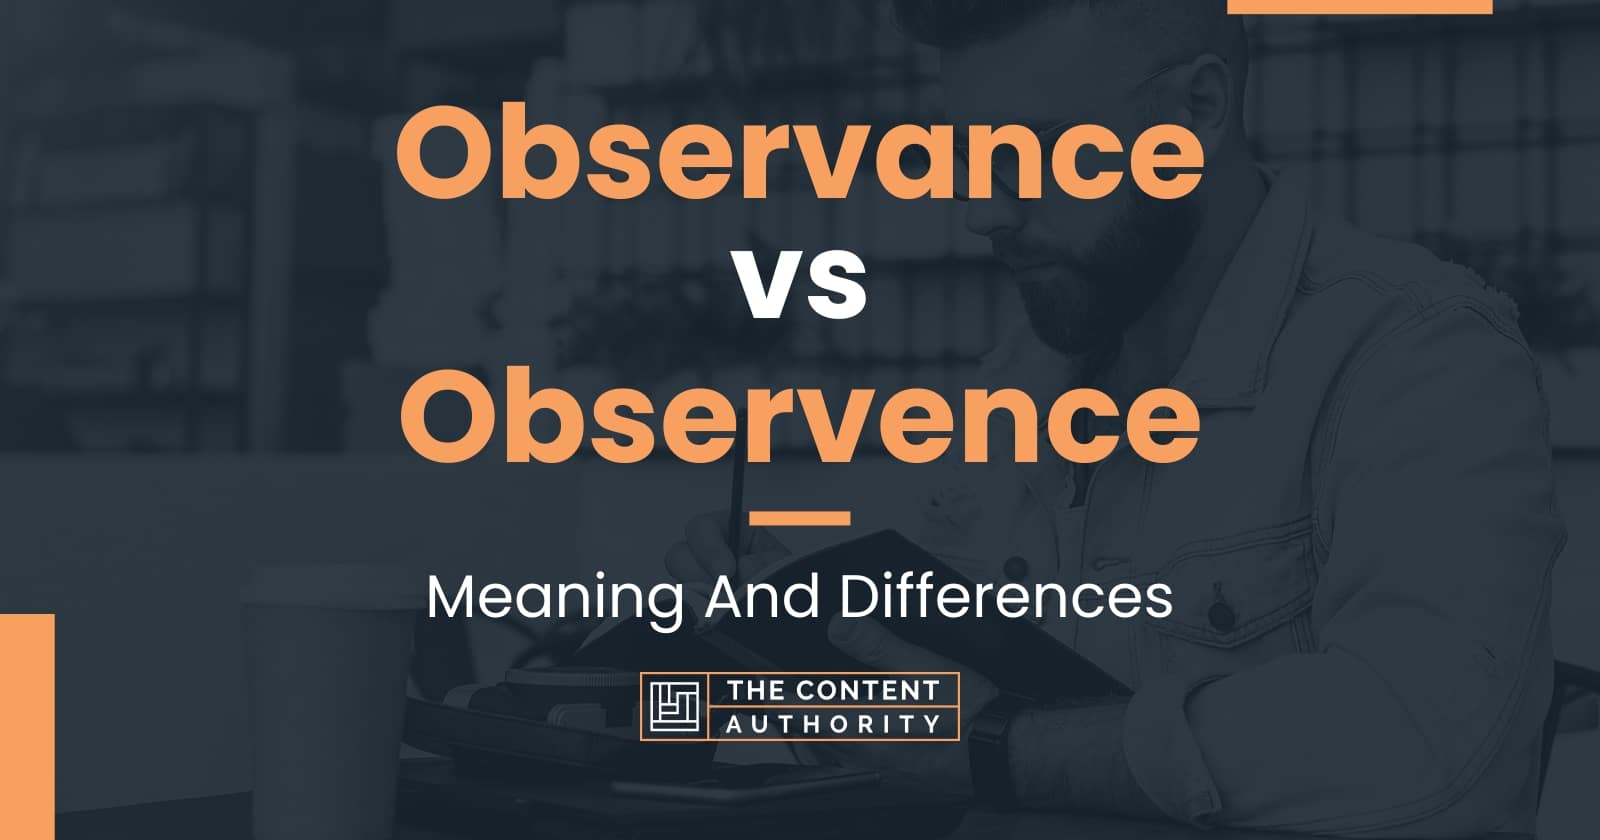 Observance Vs Observence Meaning And Differences